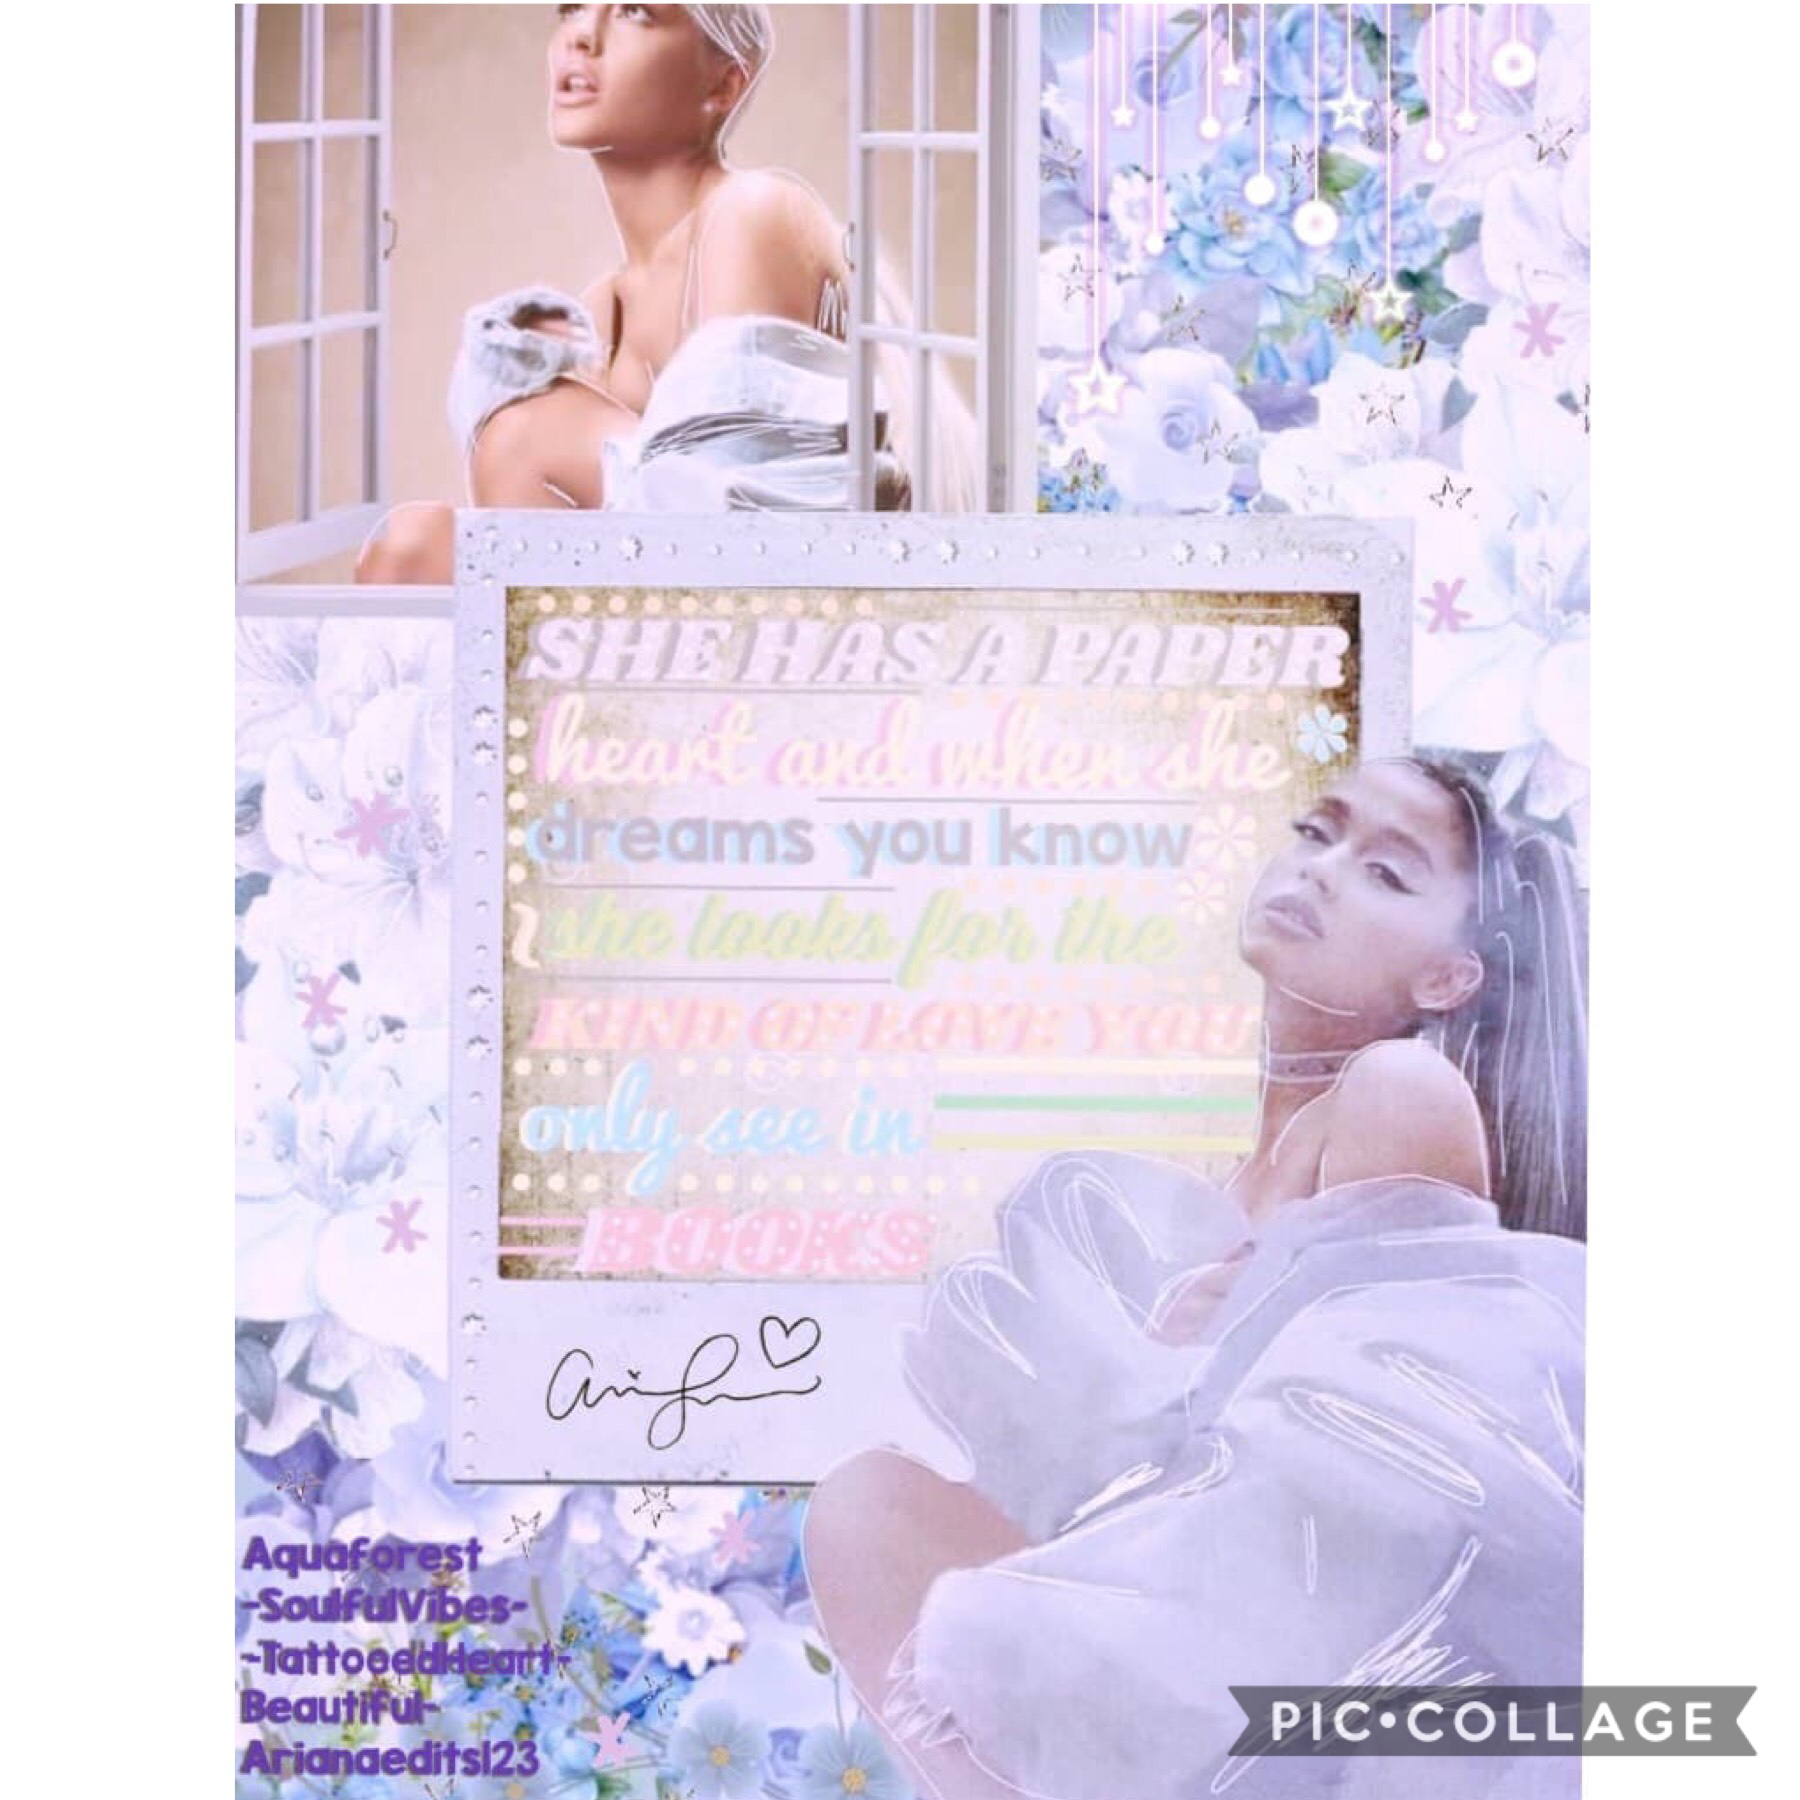 TAP
Mega collab with
@aquaforest
@-SoulfulVibes-
@Beautiful-
@-TattooedHeart-
(And @TheDailyGrande in which we created this mega collab)
Go follow TheDailyGrande for more amazing collages!